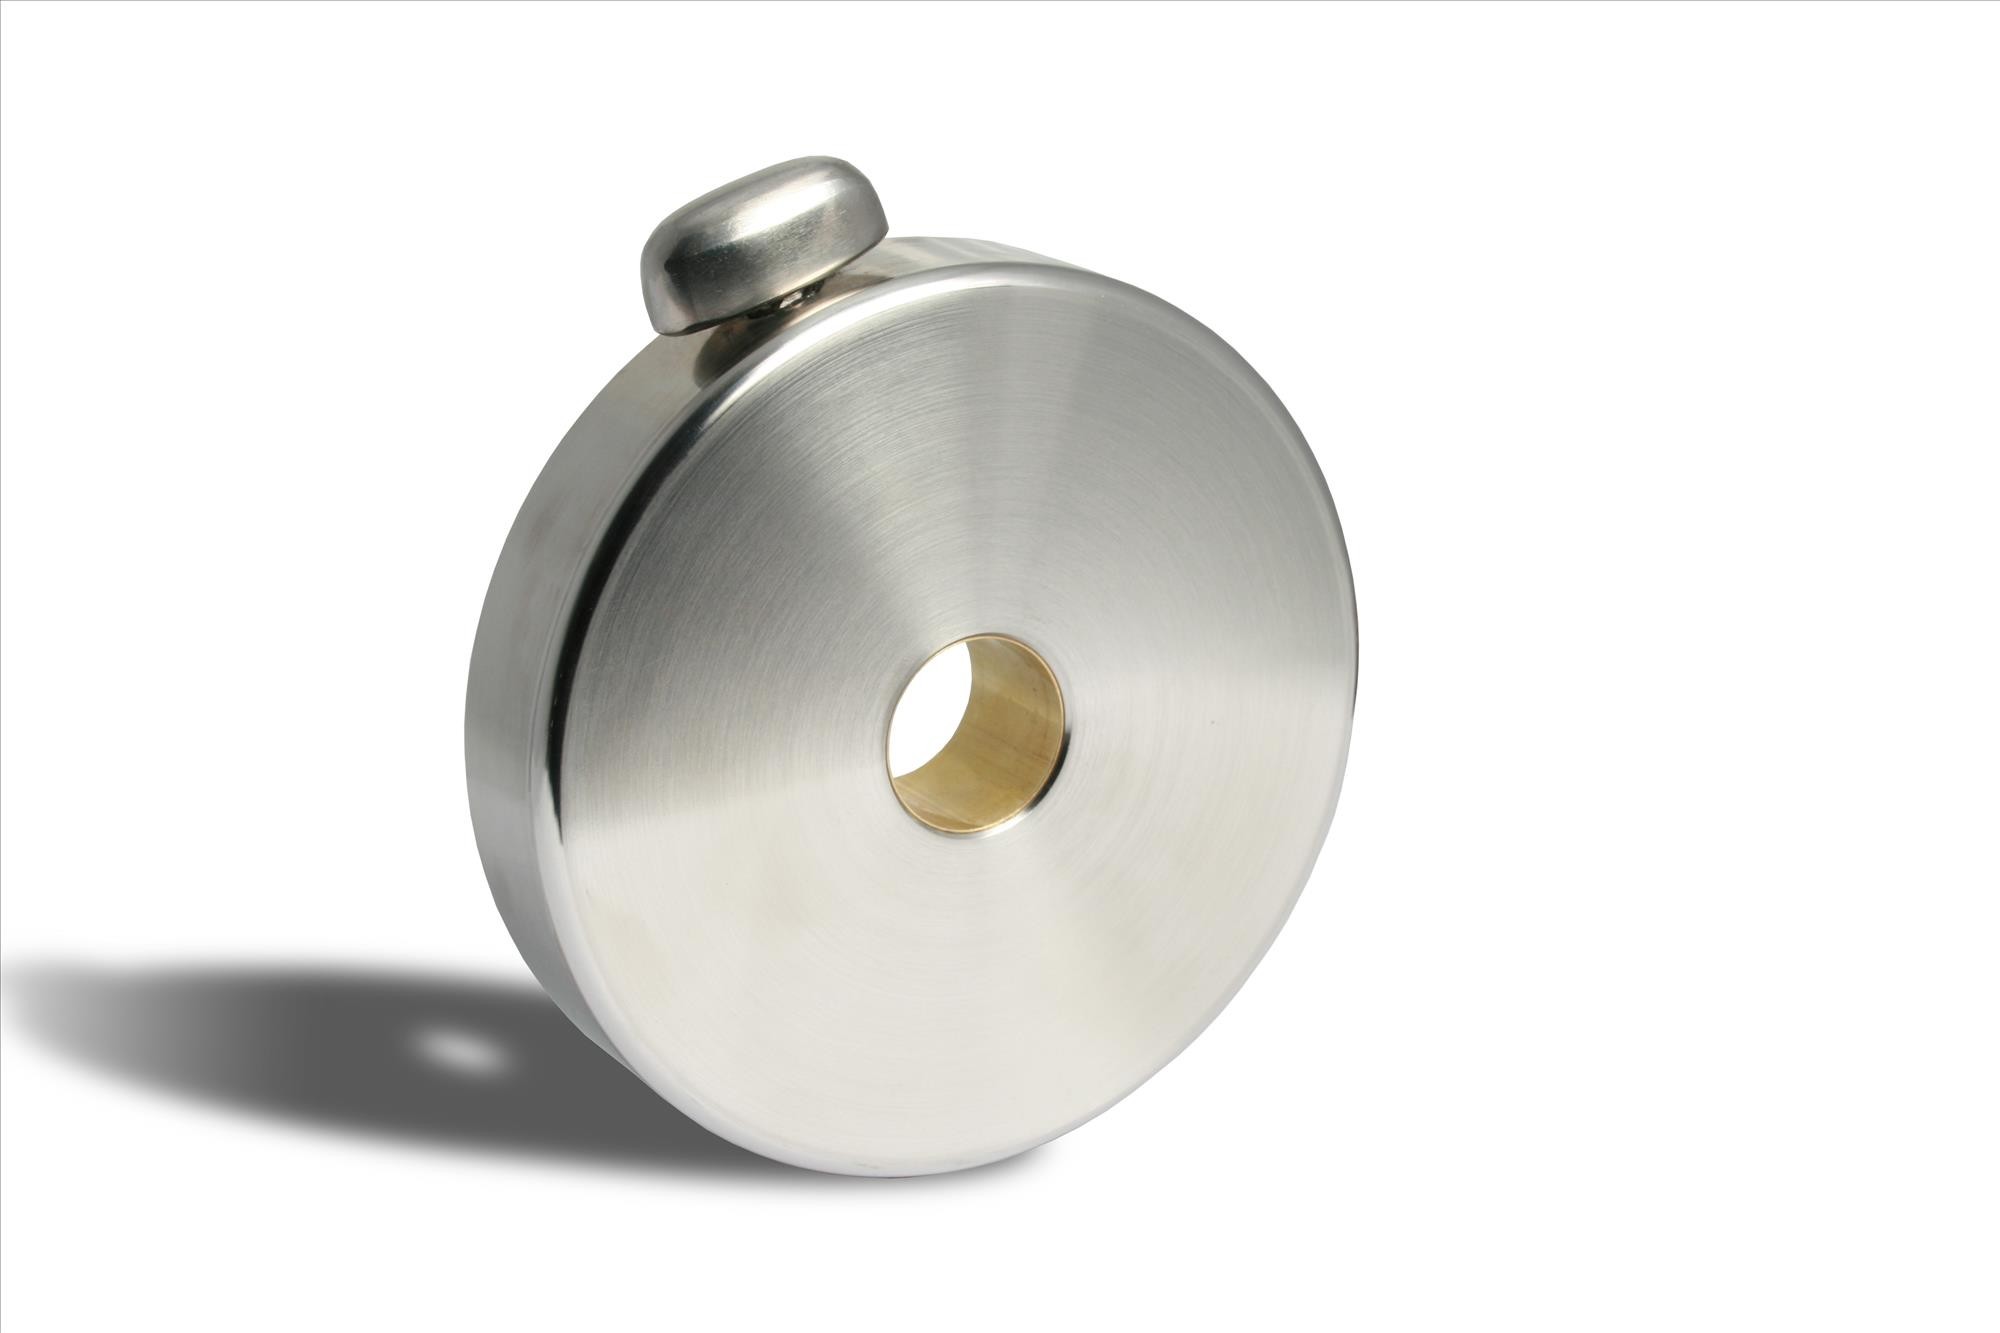 3kg counterweight Ø 30mm stainless steel (V2A)